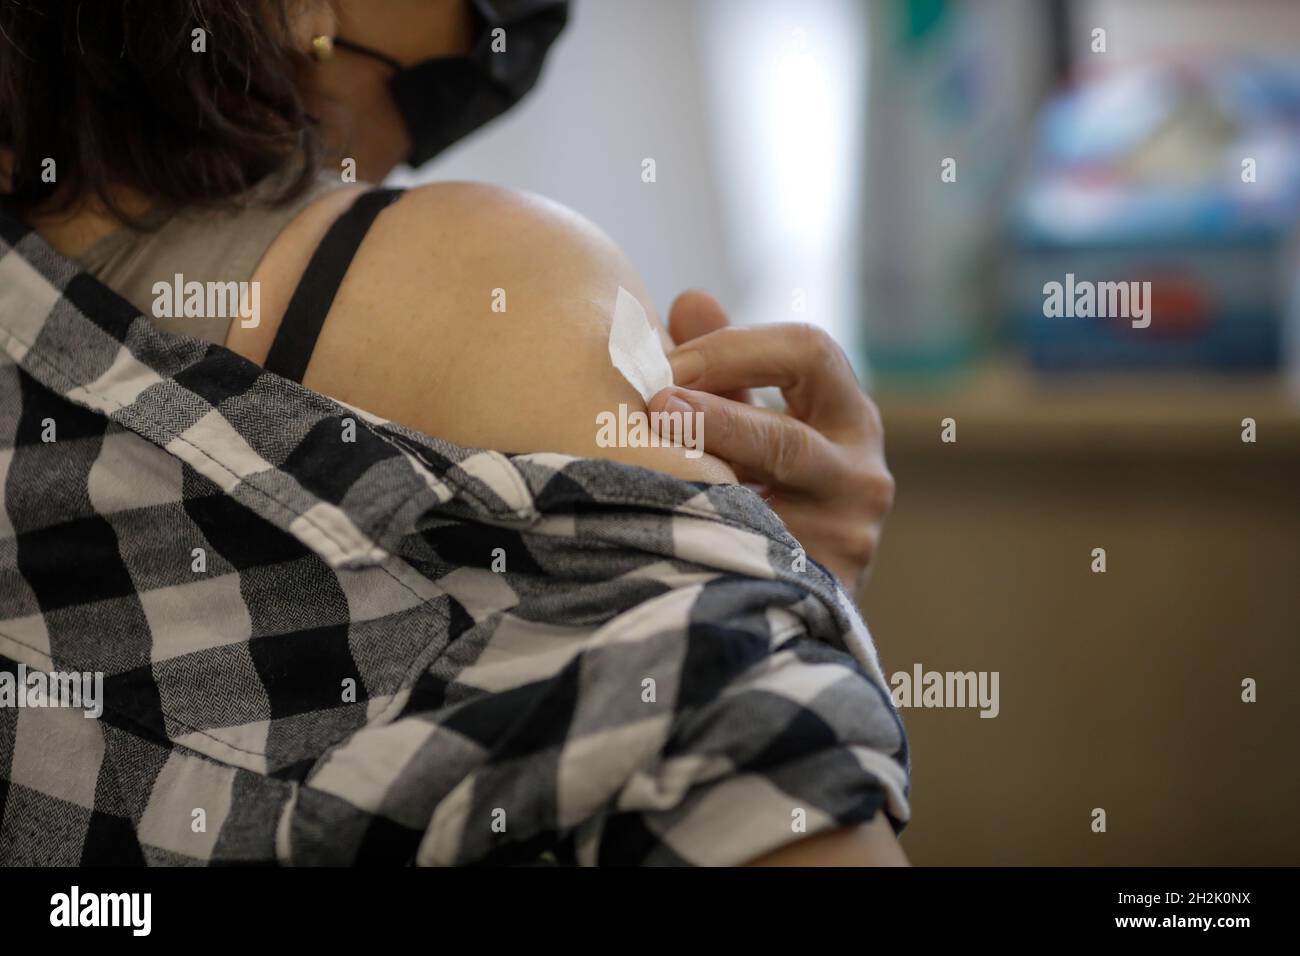 Bucharest, Romania - October 22, 2021: Details with a person getting the Sars Cov 2 (Covid-19) vaccine. Stock Photo